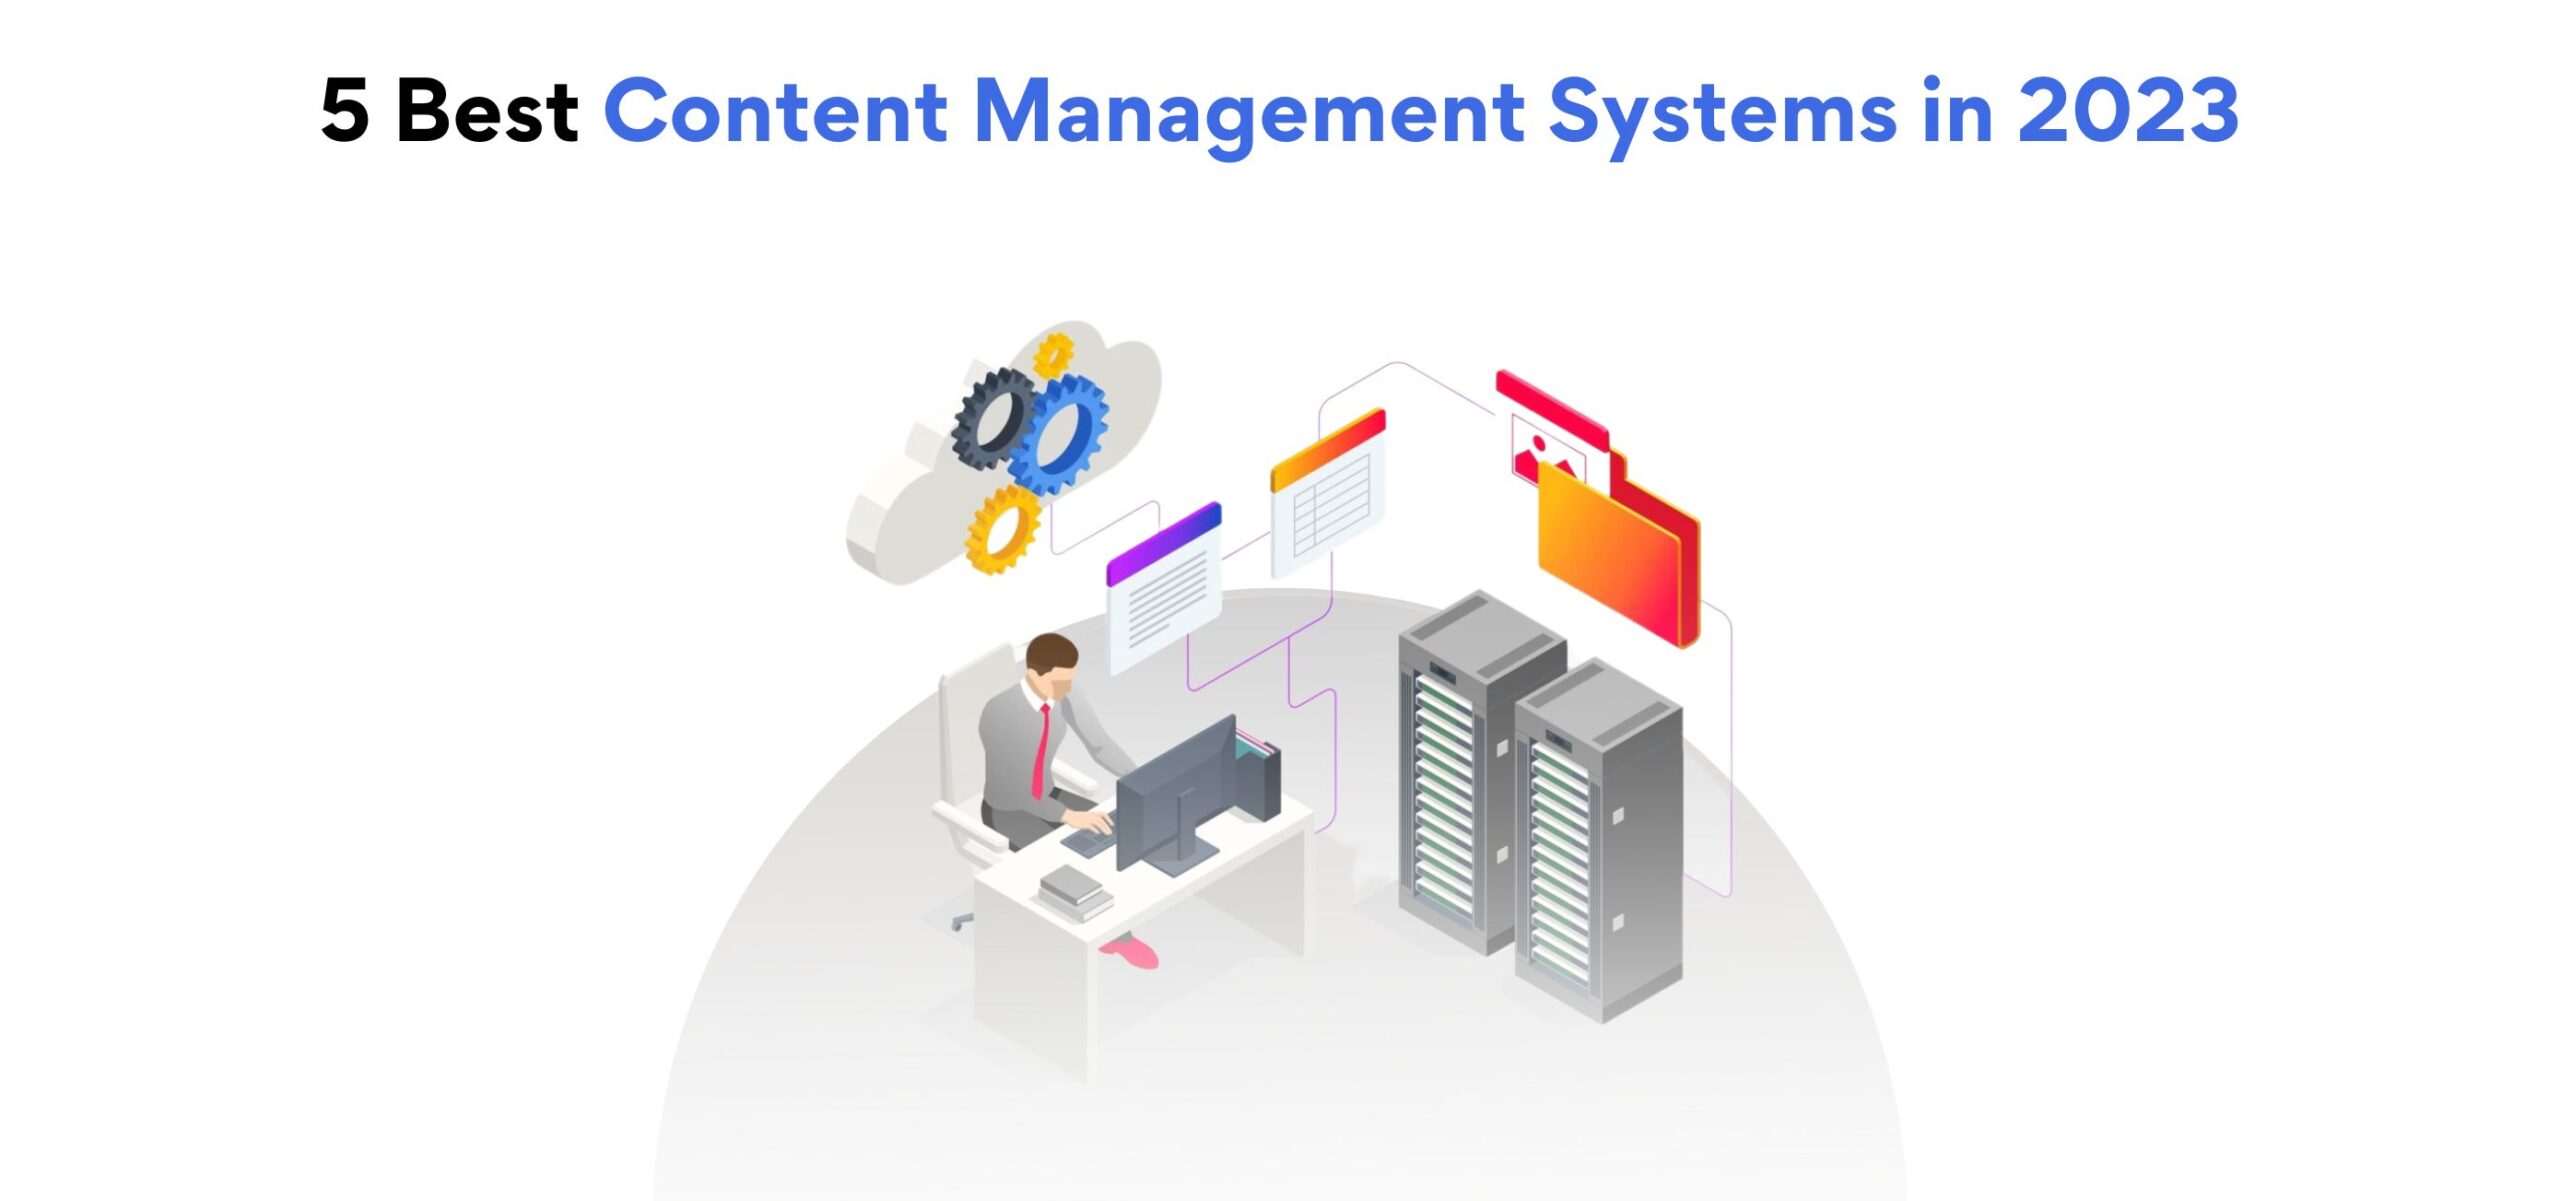 5 Best Content Management Systems in 2023